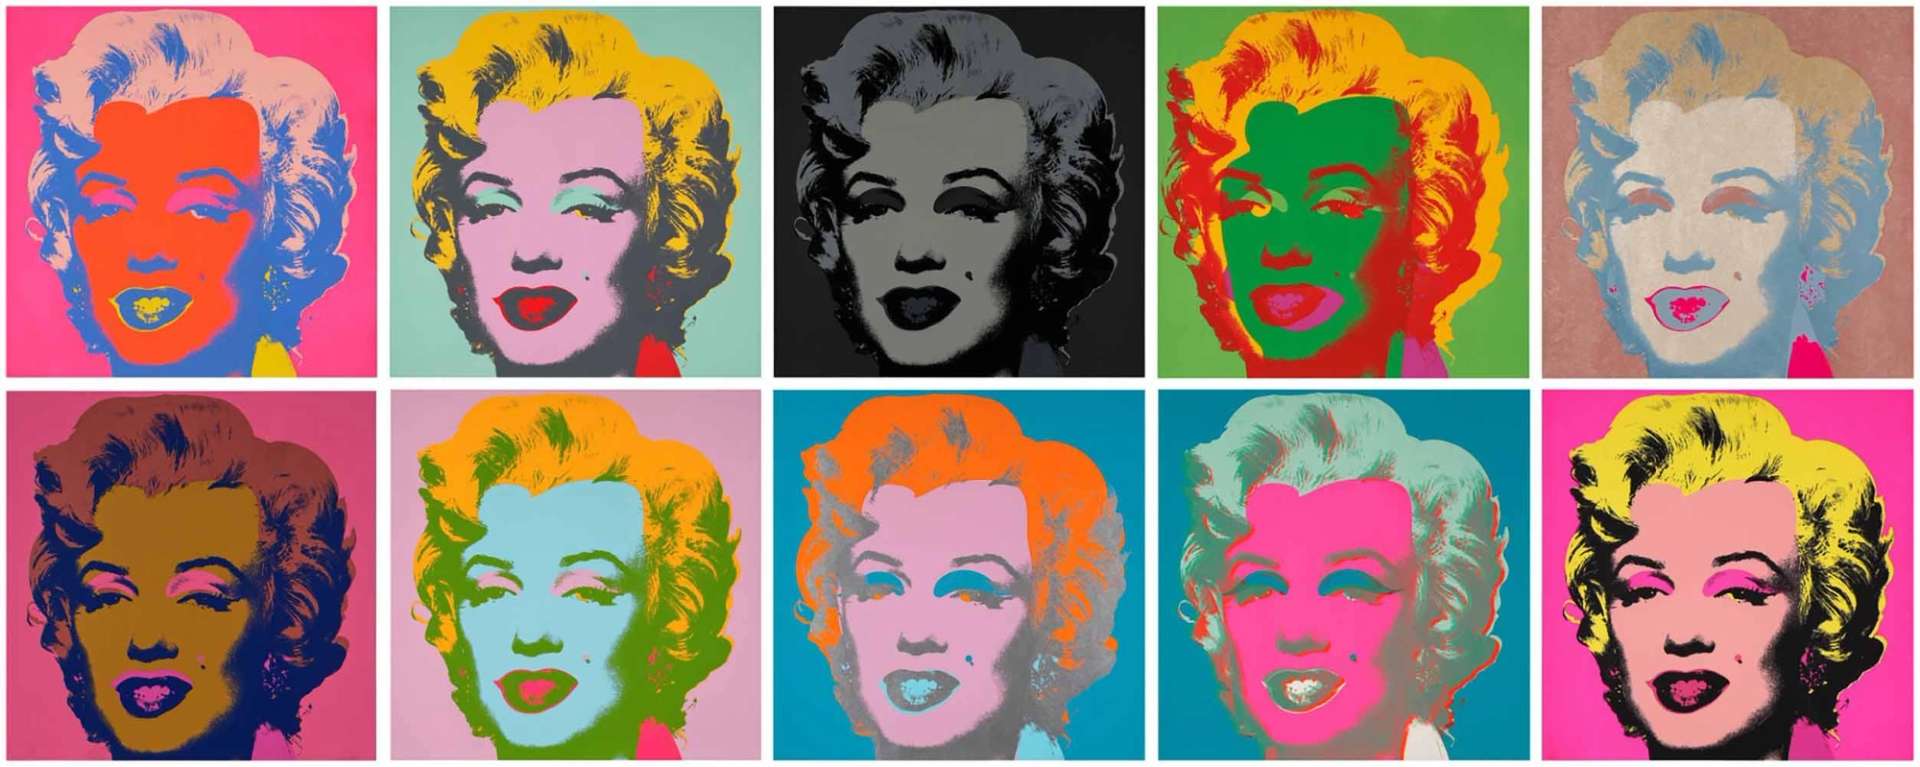 Andy Warhol's complete set of Marilyn Monroe screenprints aligned in two rows of five. Each screenprint is a cropped facial portrait of the celebrity actress, presented in varying vibrant colours.